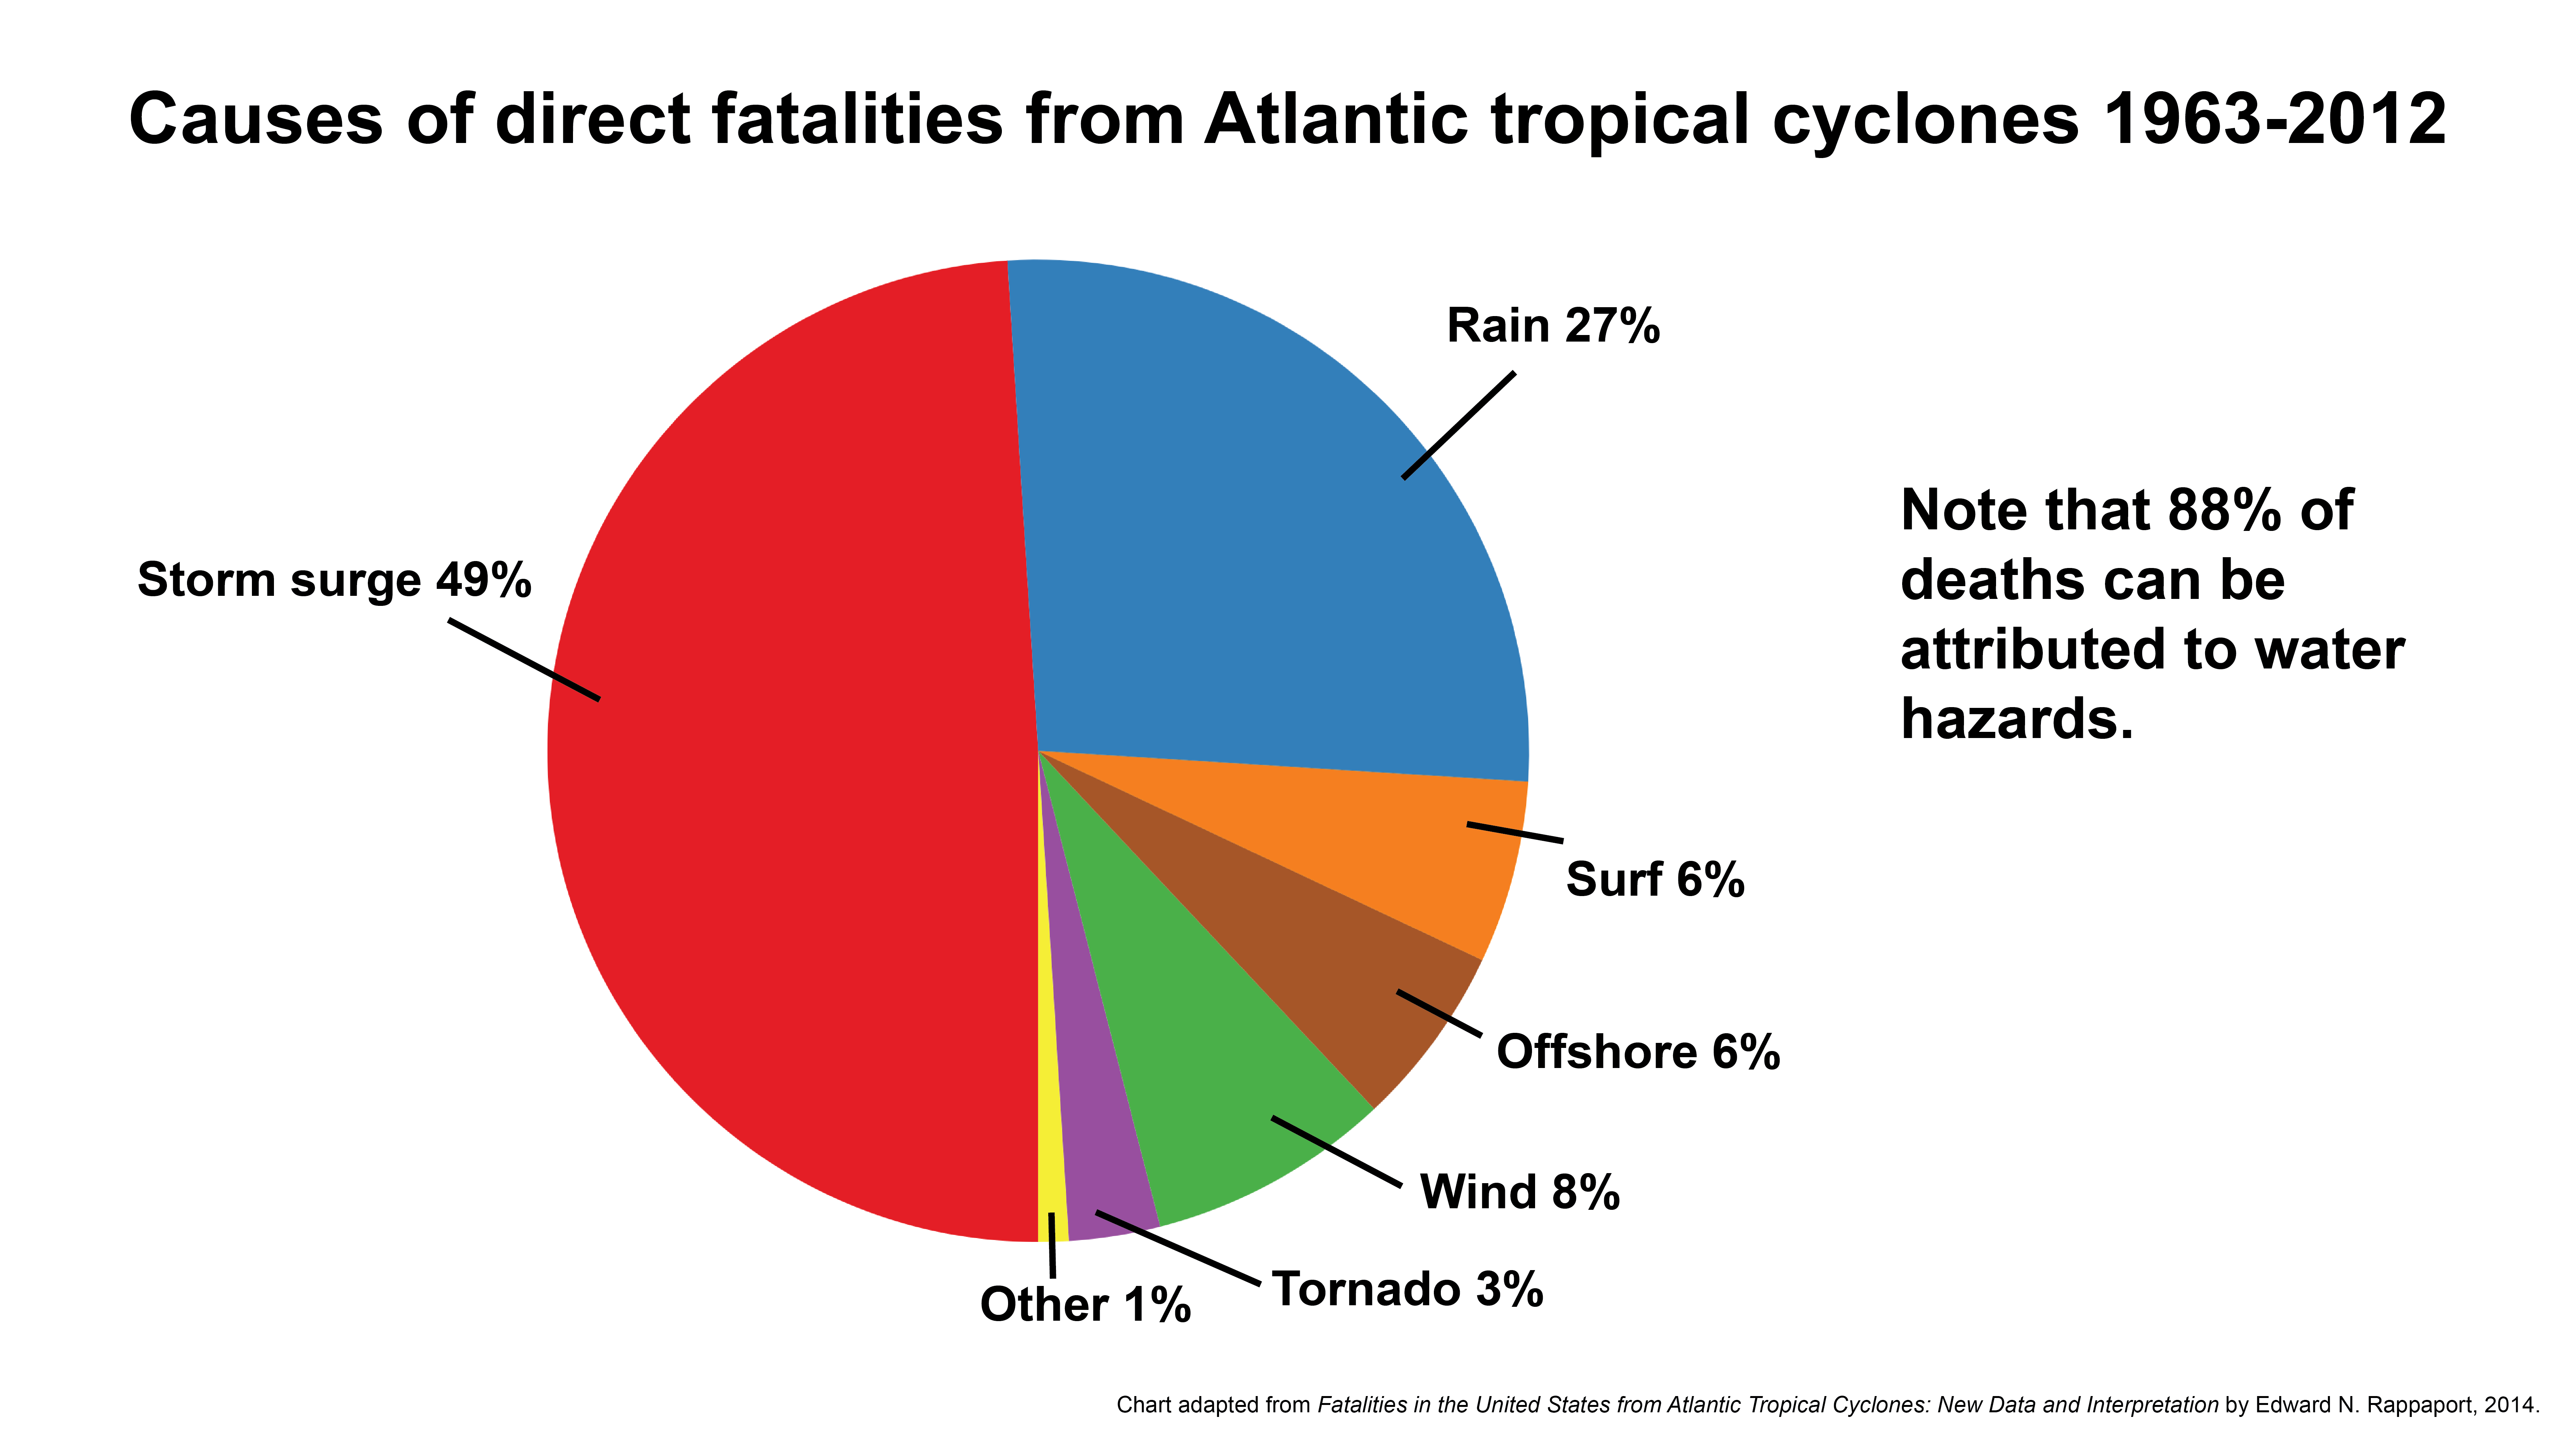 Causes of direct fatalities from Atlantic tropical cyclones 1963-2012. Storm surge: 49%, rain: 27%, surf: 6%, offshore: 6%, wind: 8%, tornado: 3%, other: 1%. Note that 88% of deaths can be attributed to water hazards. Chart adapted from Fatalities in the United States from Atlantic Tropical Cyclones: New Data and Interpretation by Edward N. Rappaport, 2014.